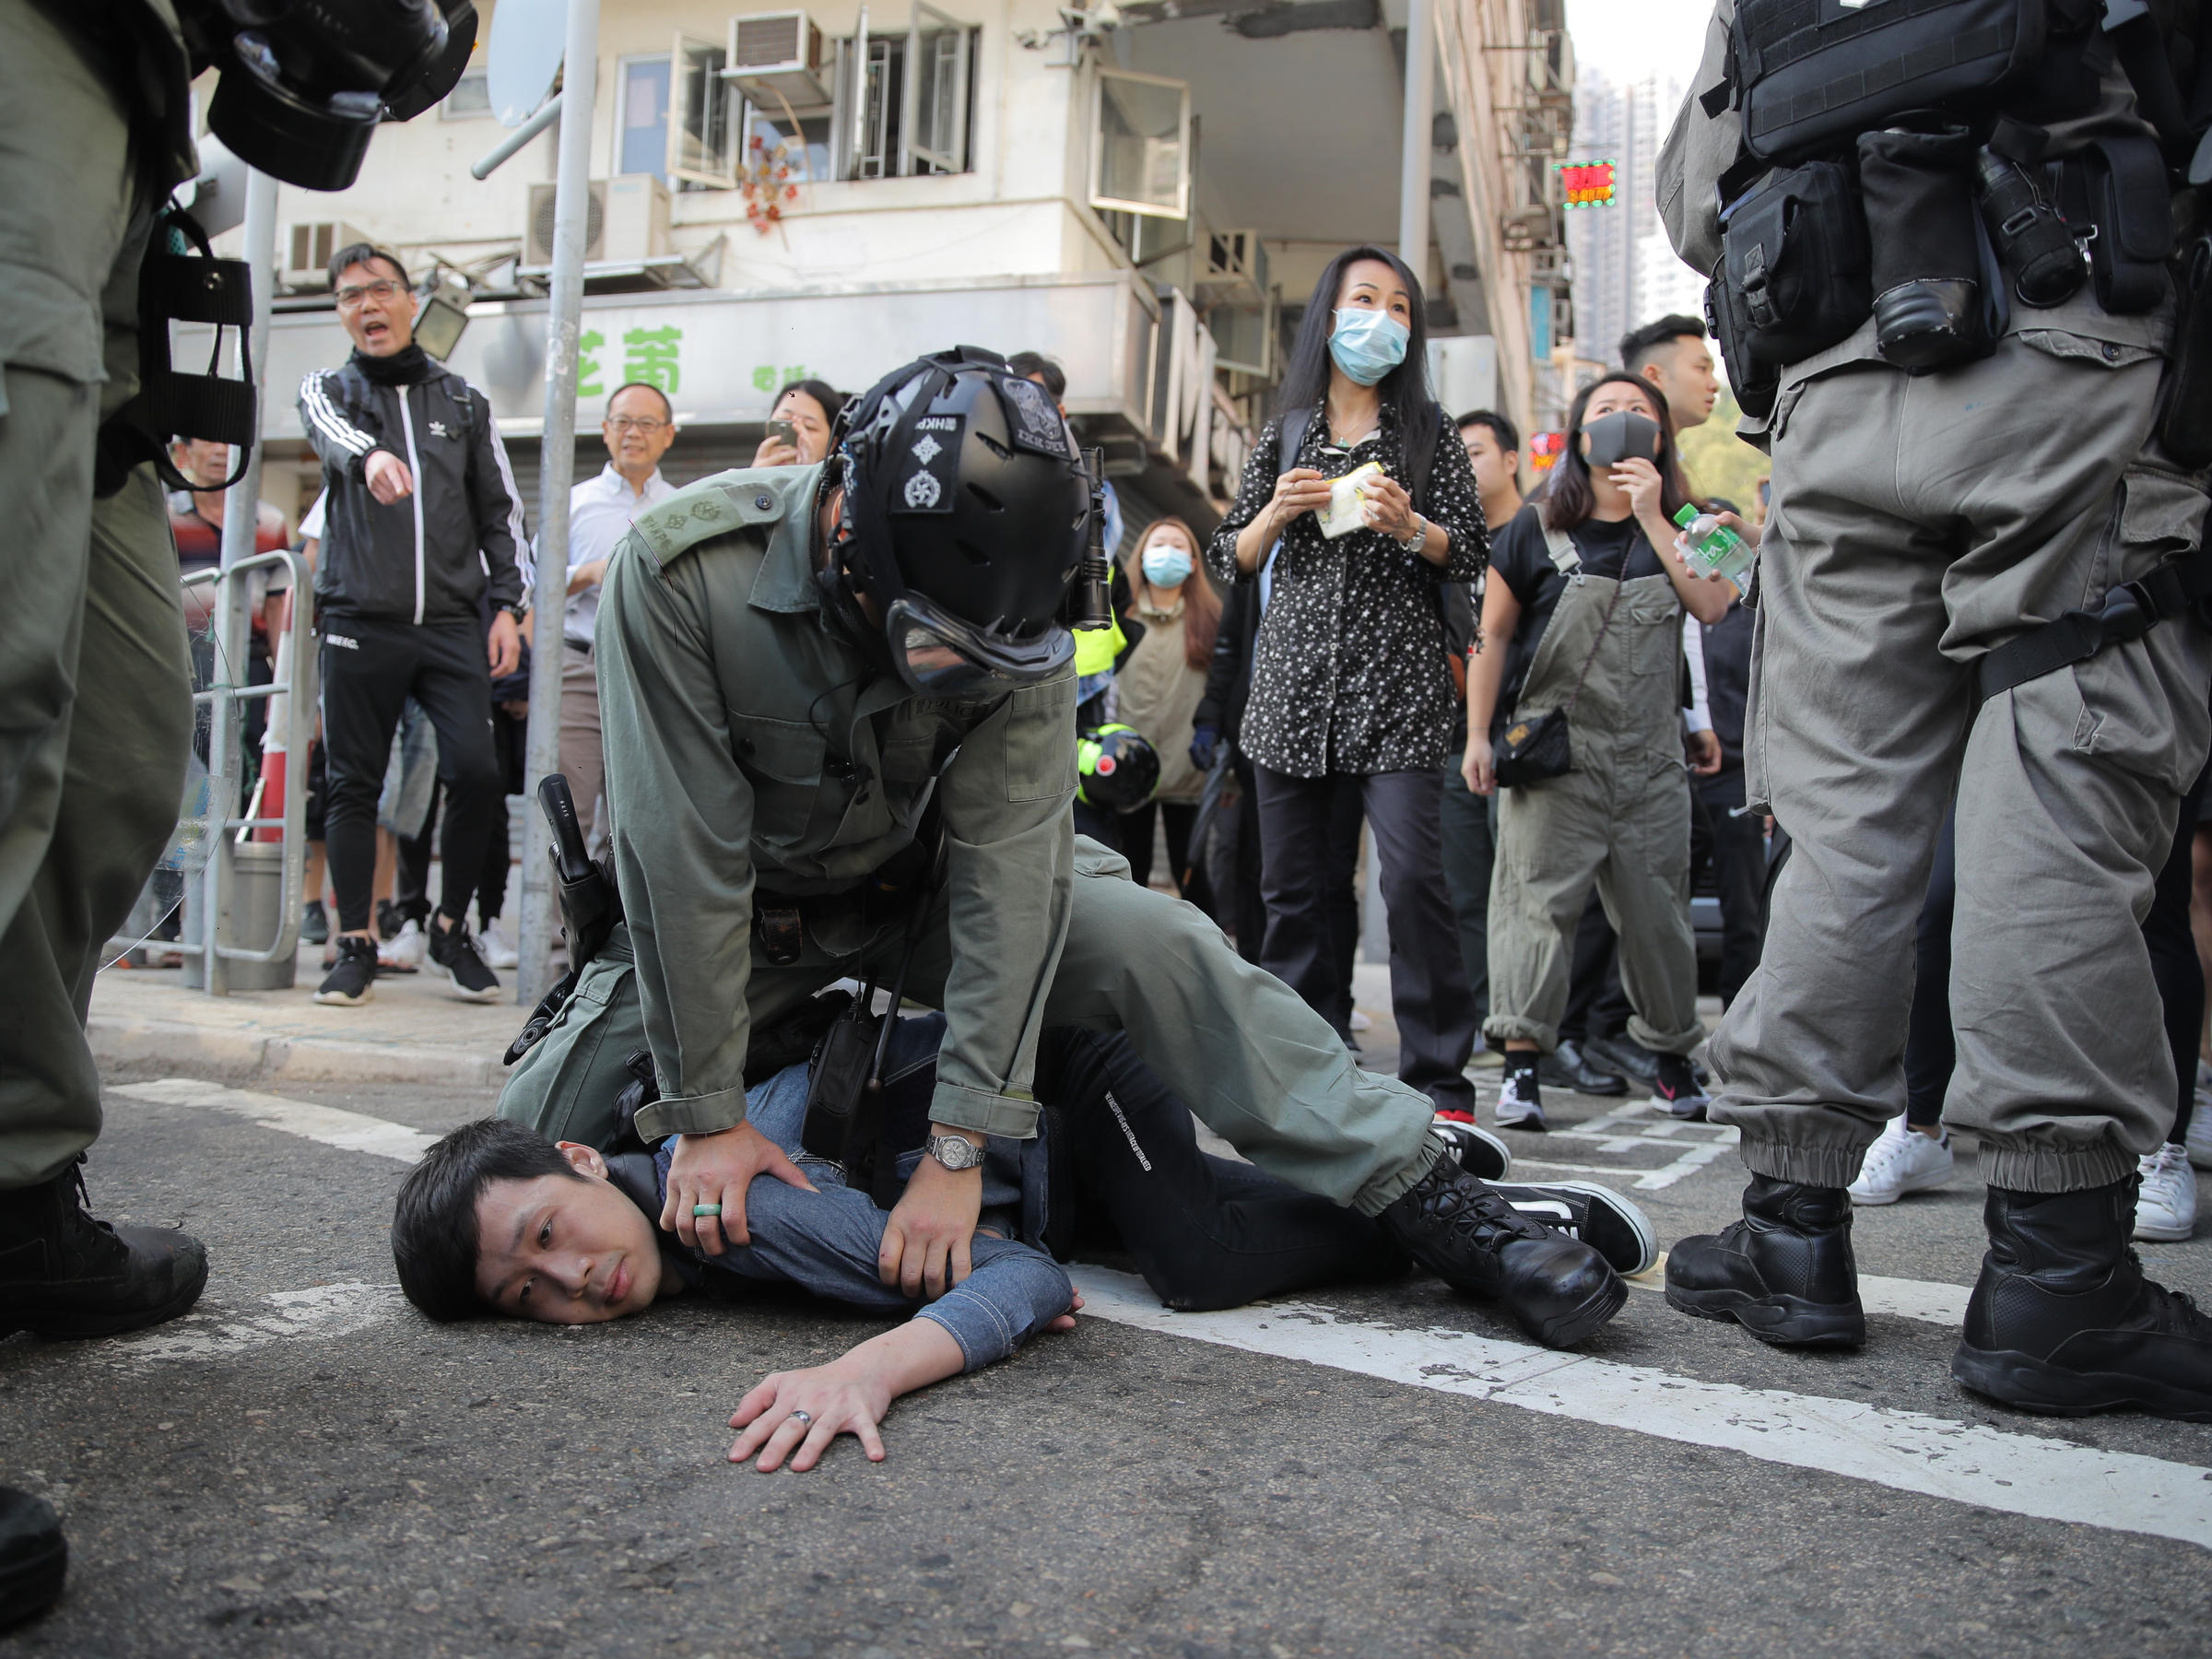 With Escalating Violence In Hong Kong U S Urges Both Sides To Exercise Restraint Wjct News